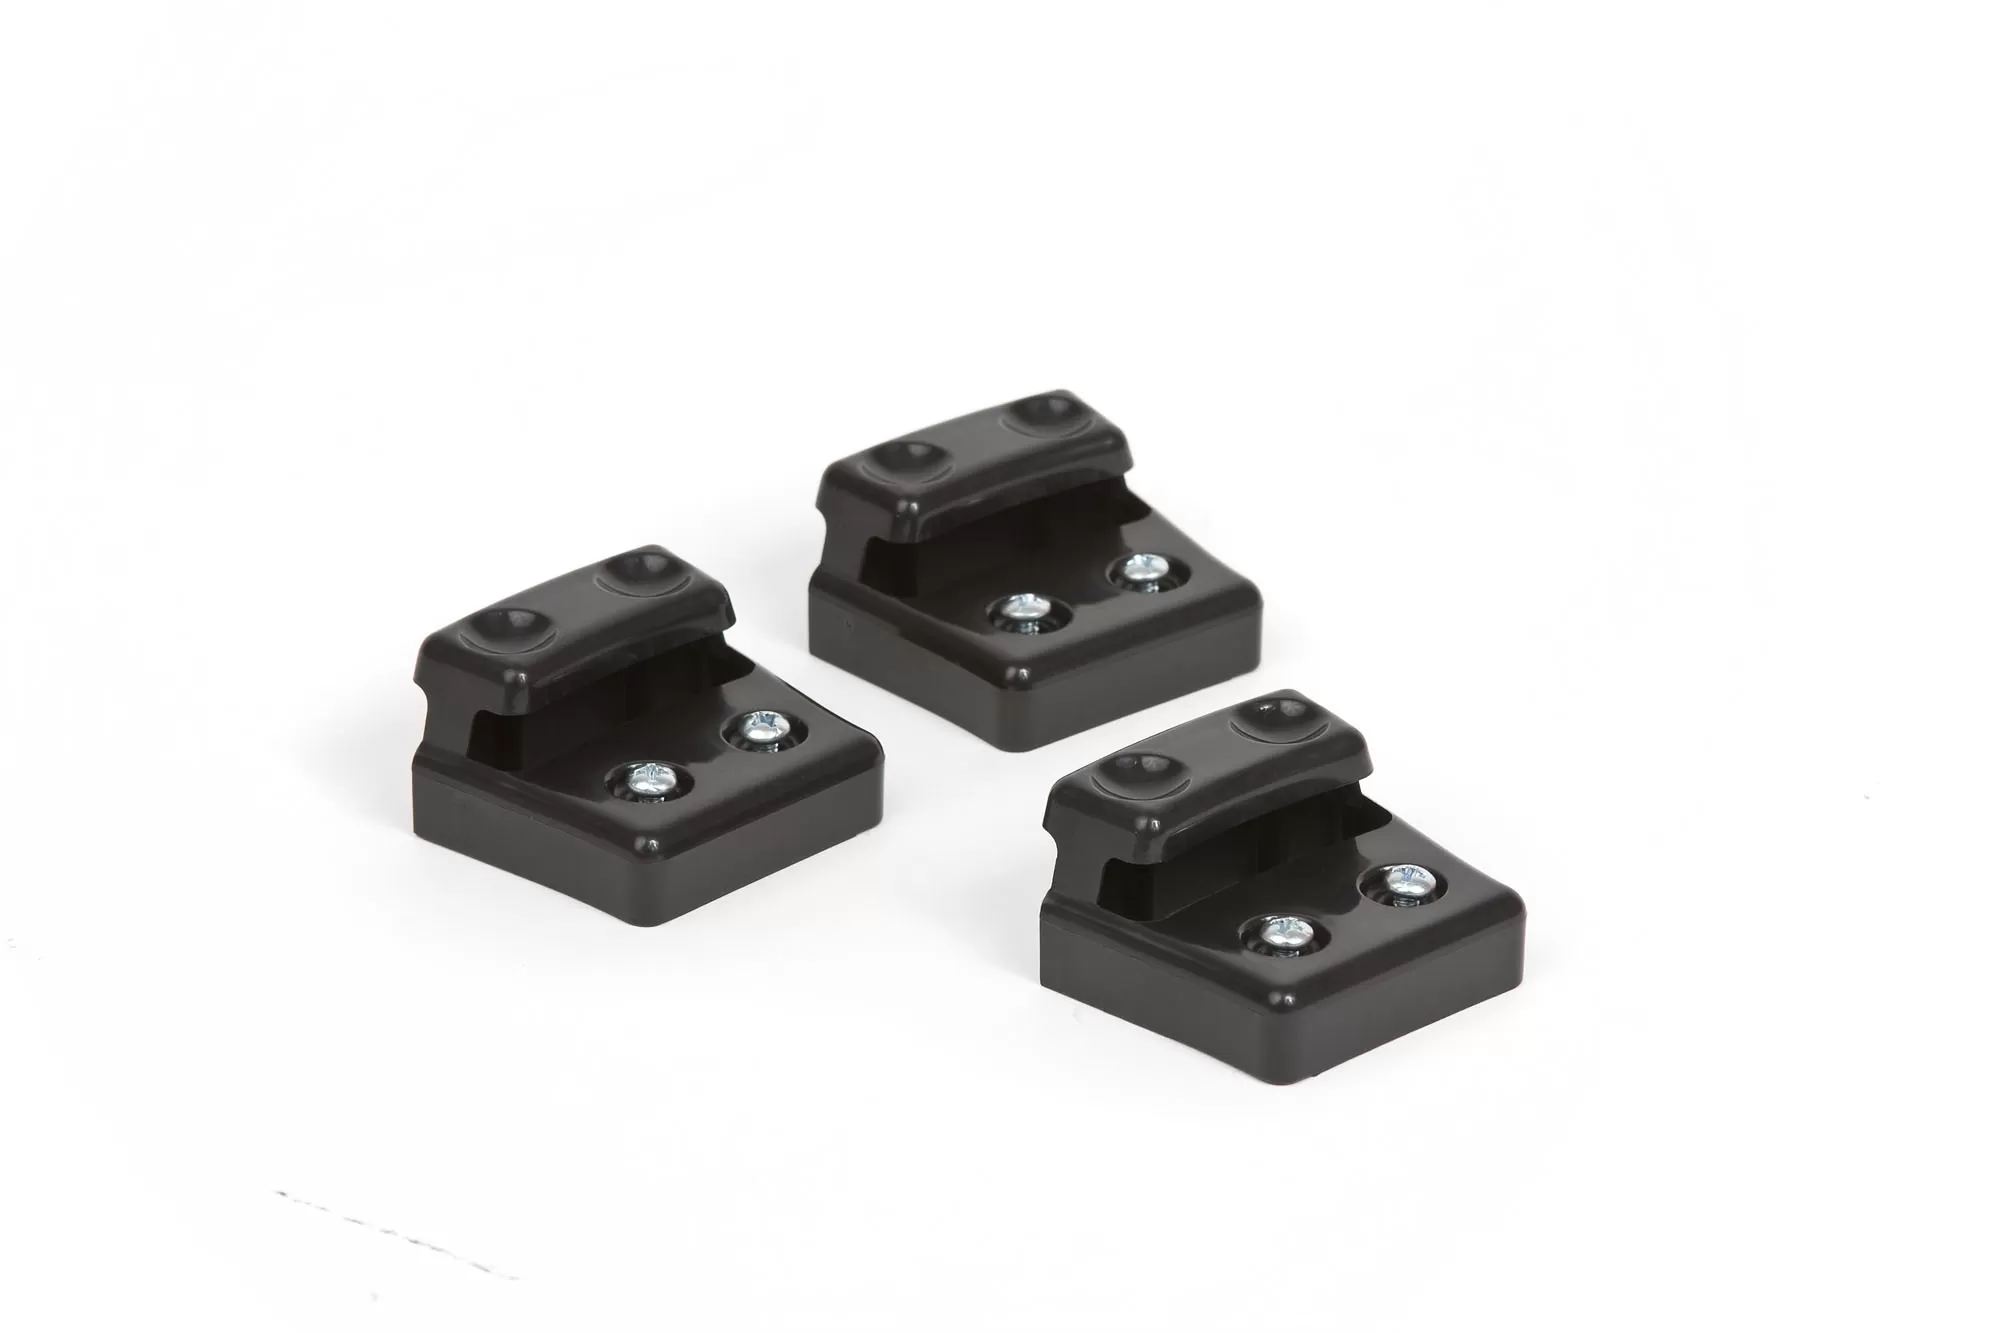 Daystar Cam Can Retainer Kit Black Package of 3 Cams - KU71117BK